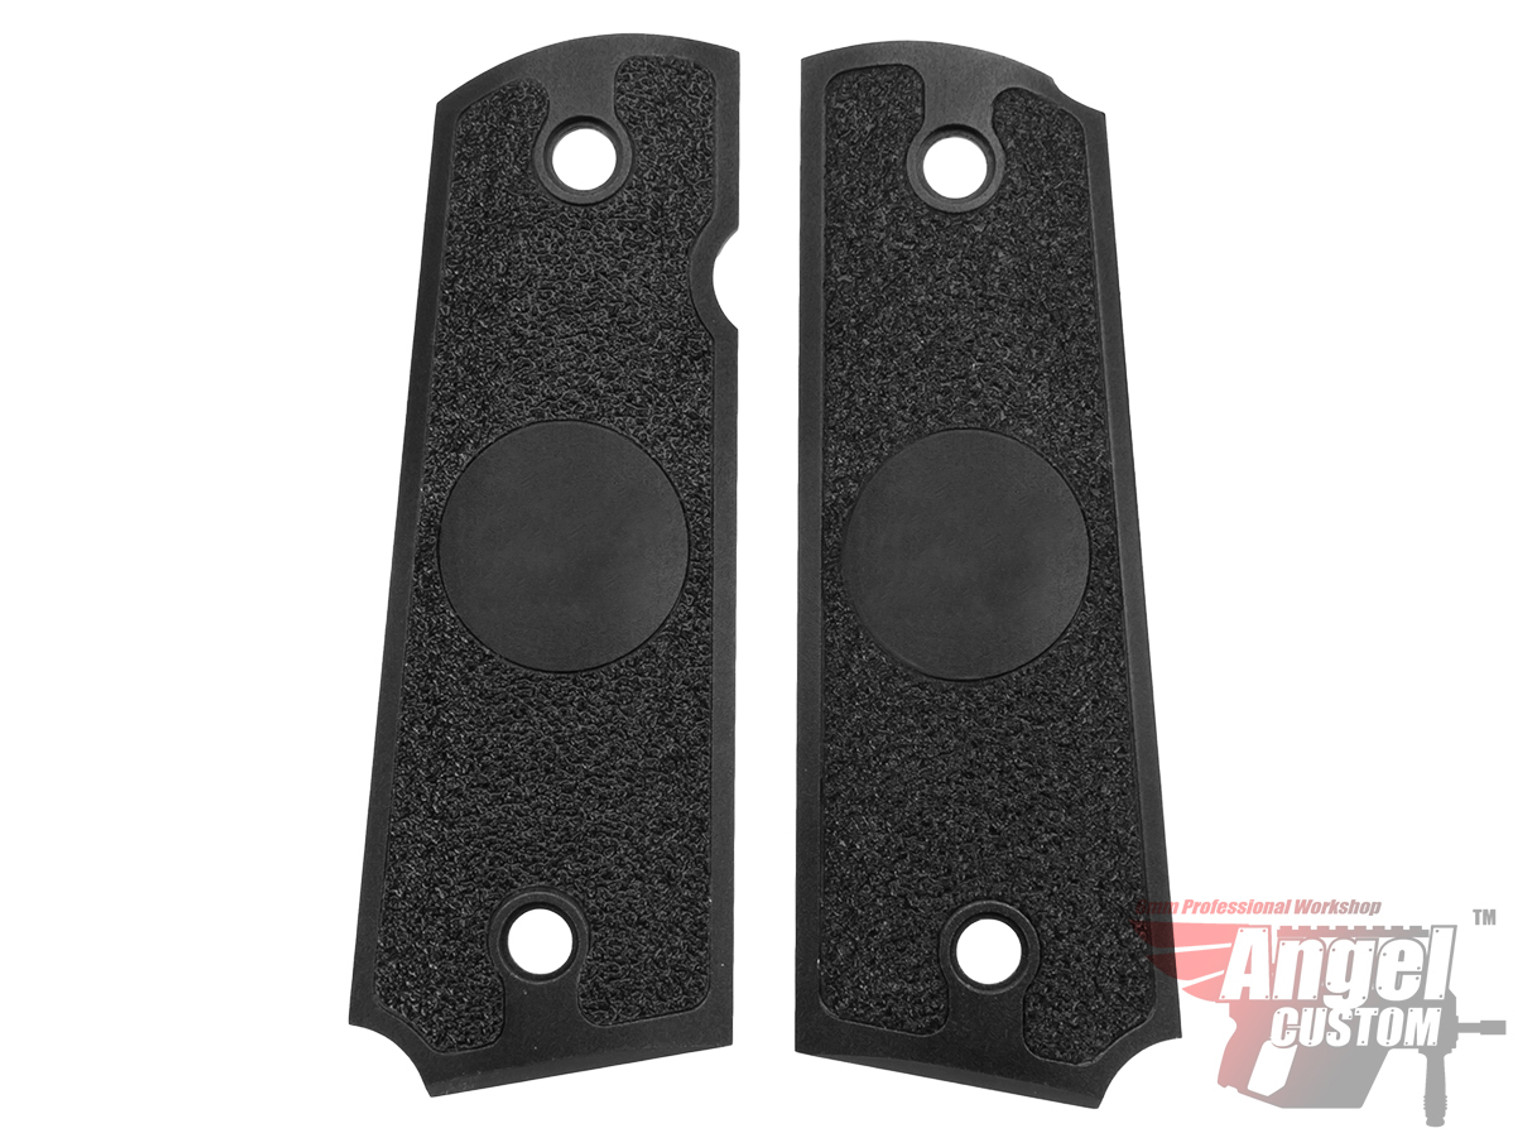 Angel Custom CNC Machined Tac-Glove Grips for Tokyo Marui/KWA/Western Arms 1911 Series Airsoft Pistols - Black